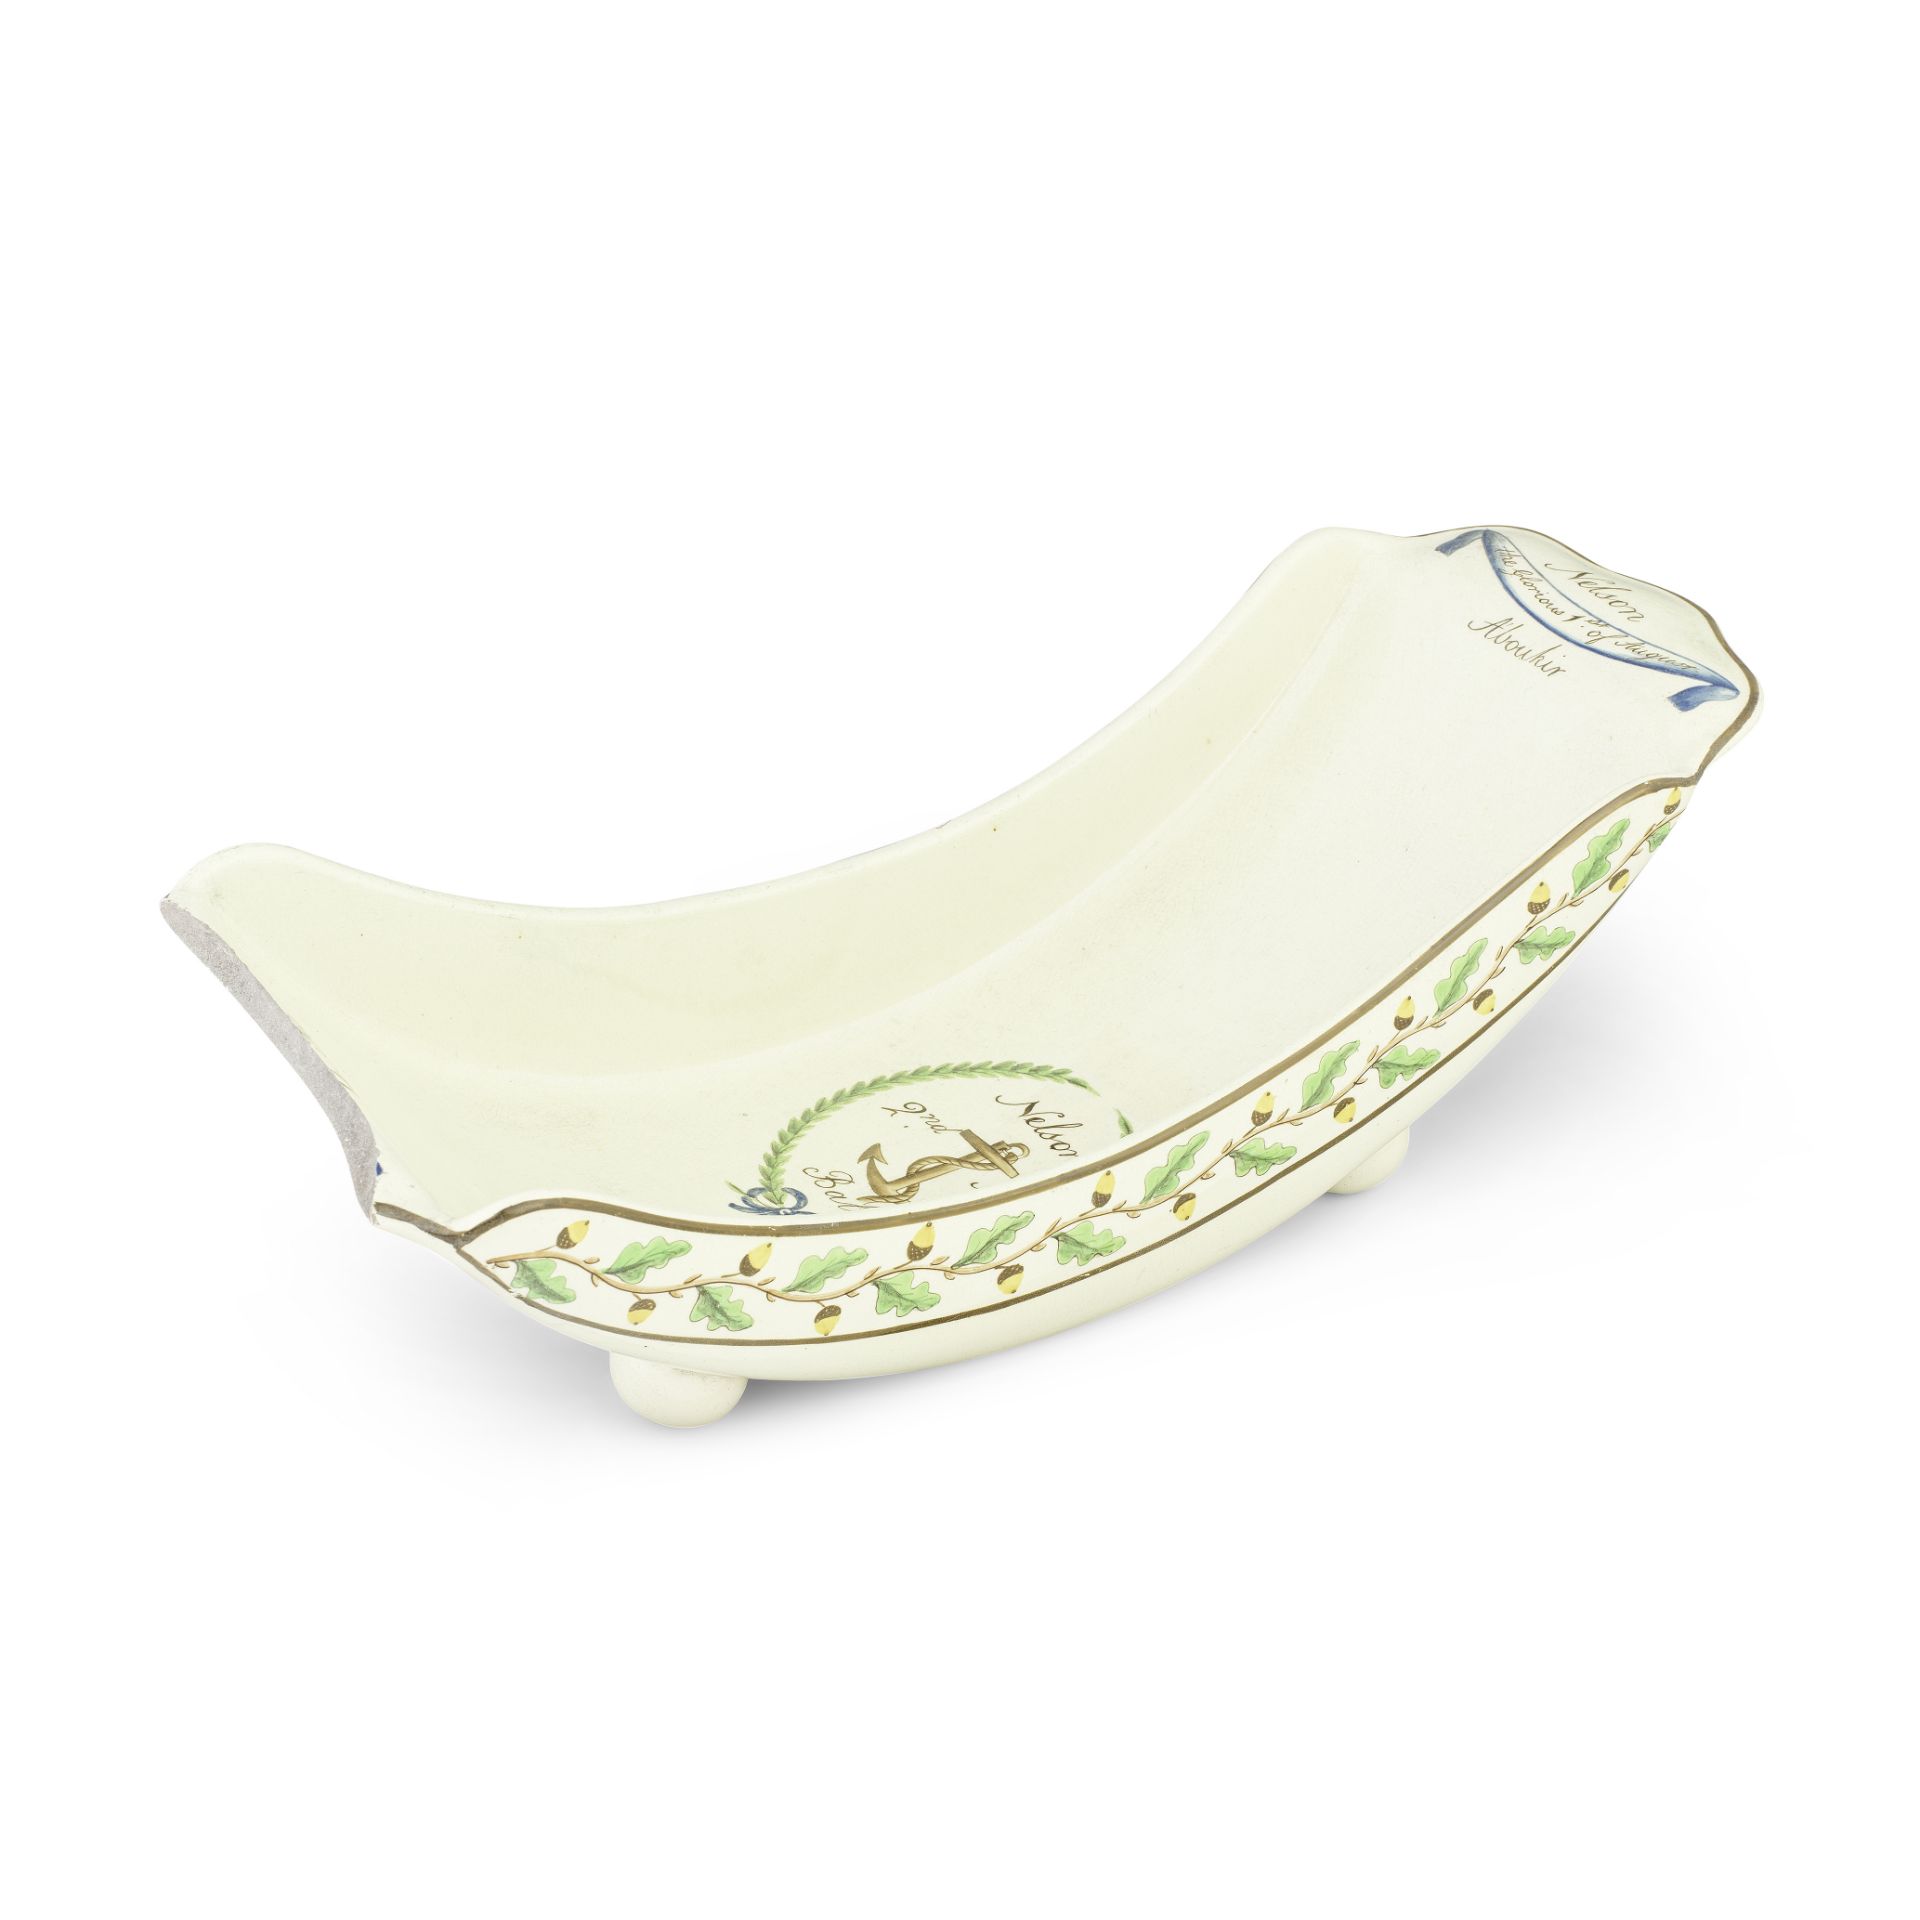 A creamware cheese tray from the 'Baltic Set Dinner Service', circa 1802